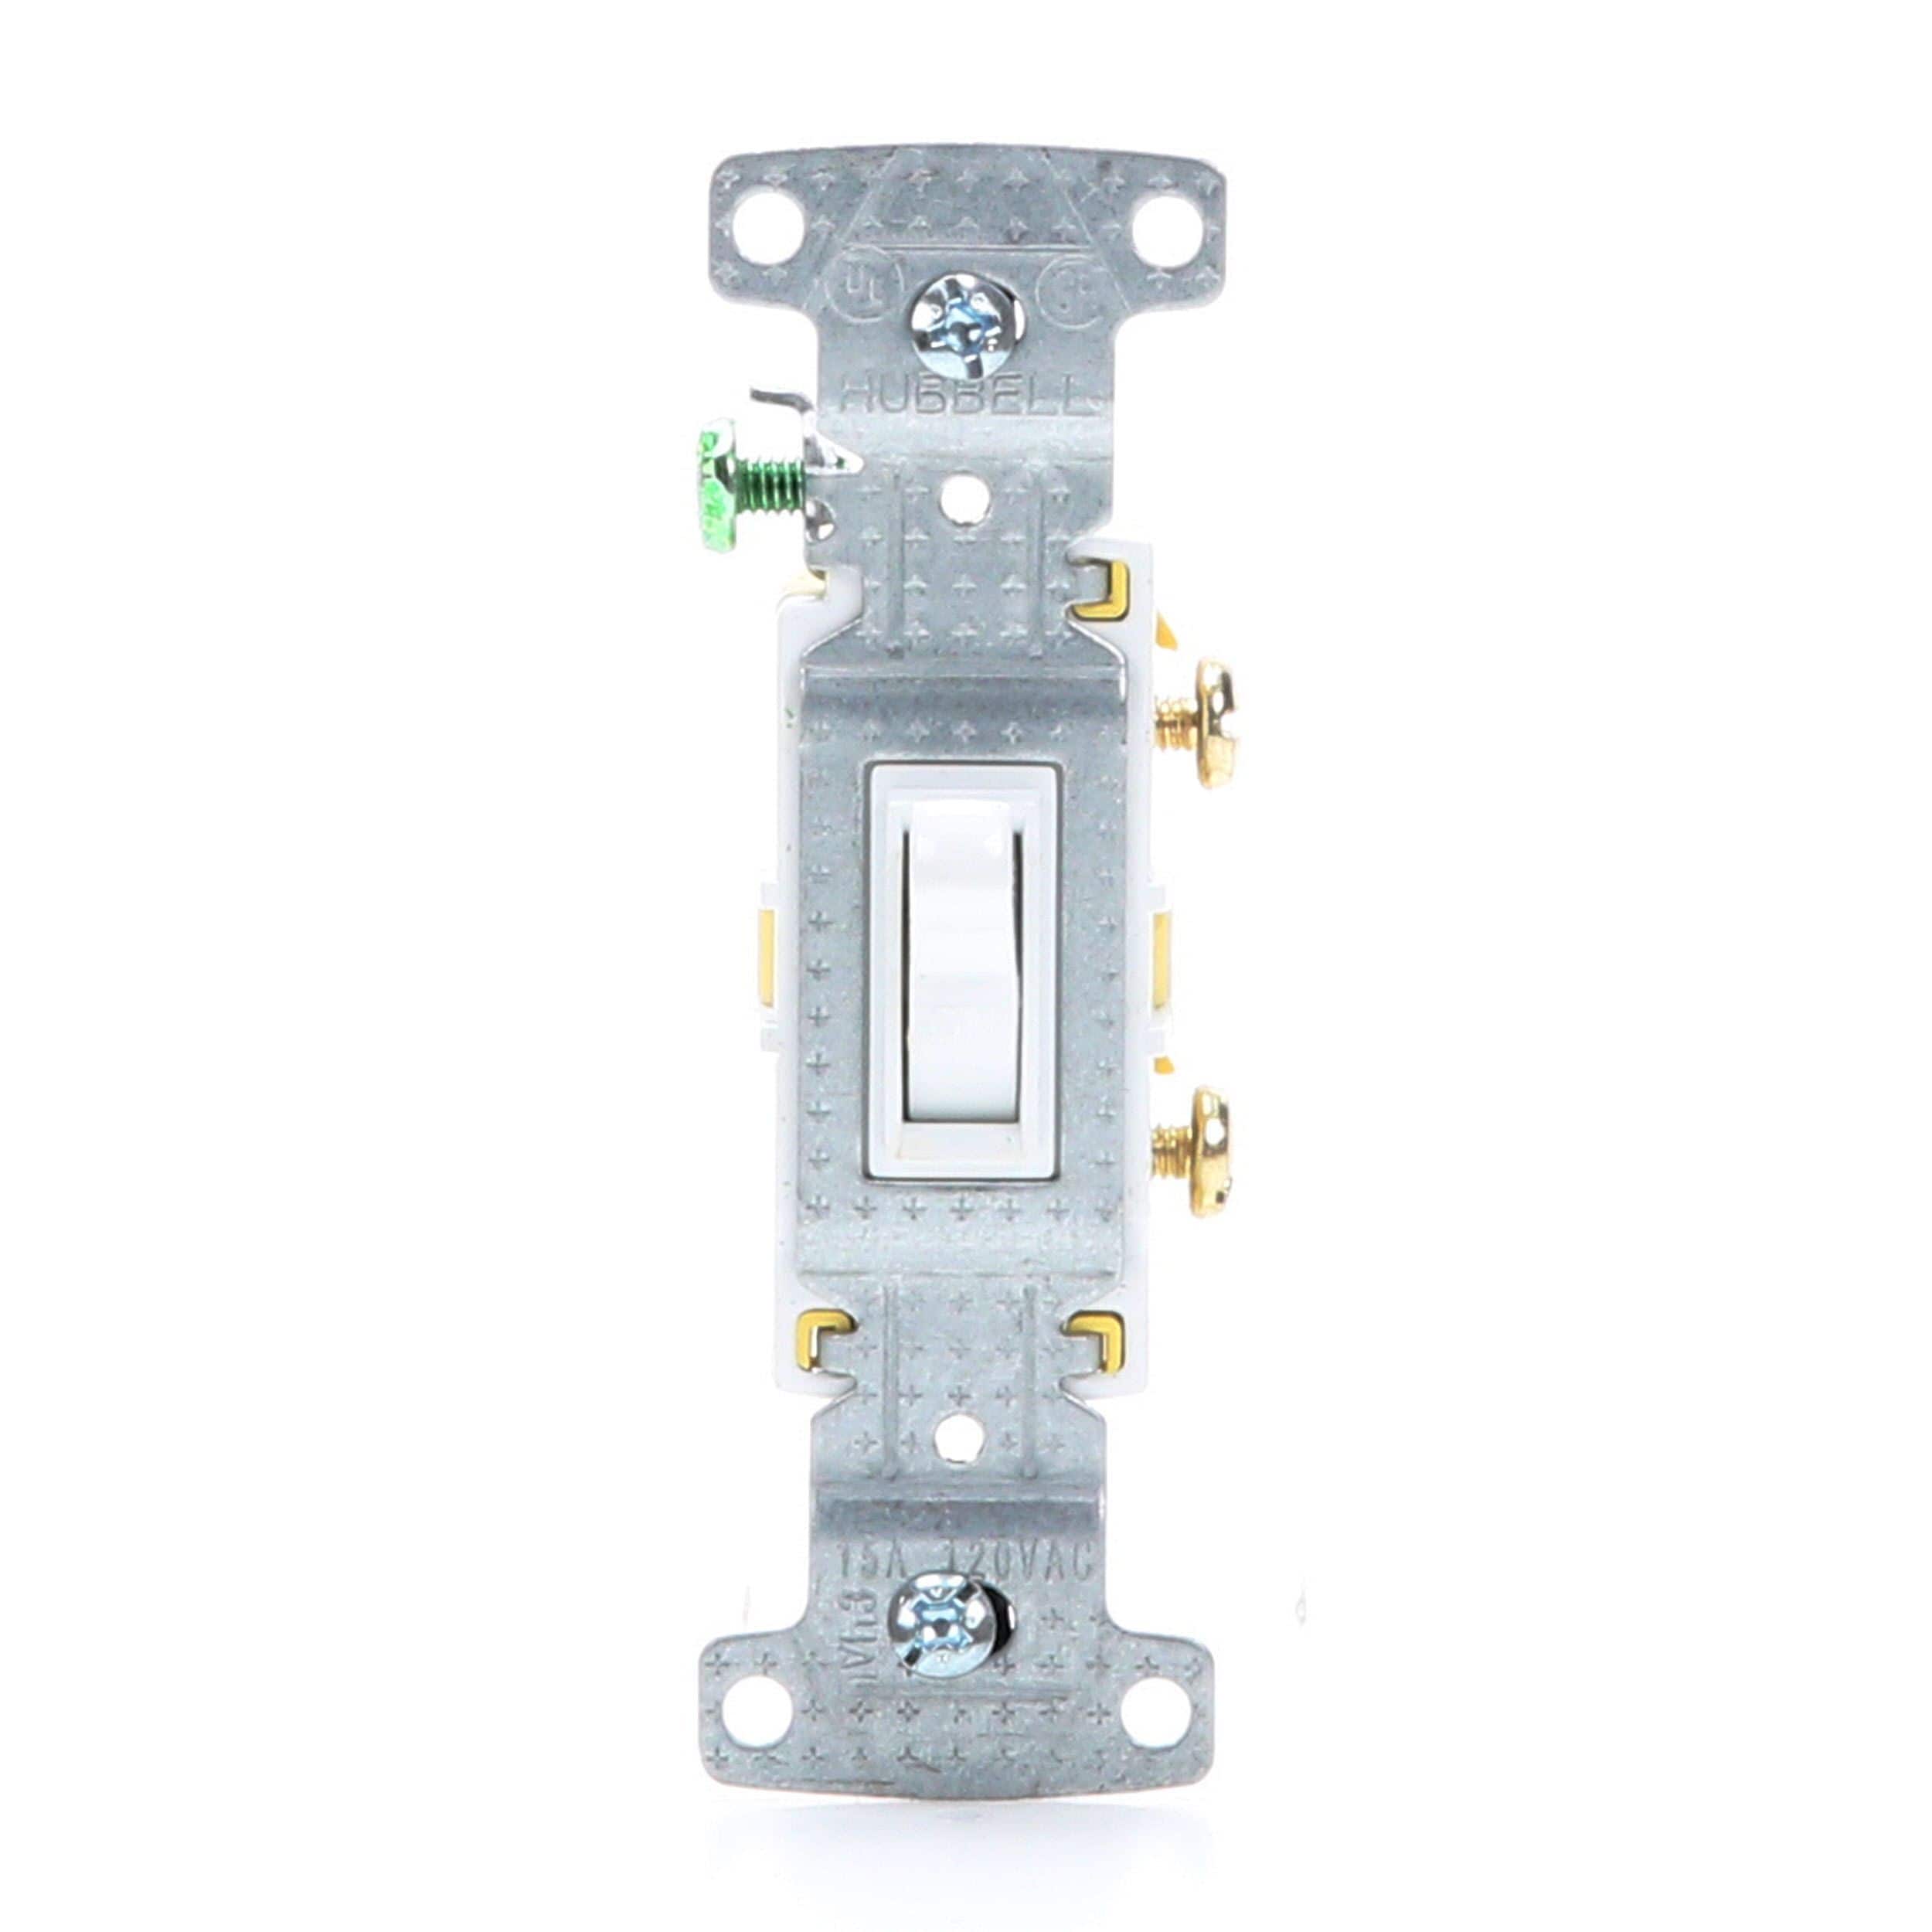 10 Hubbell White Residential 3-Way Toggle Wall Light Switches 15A 120V RS315W 